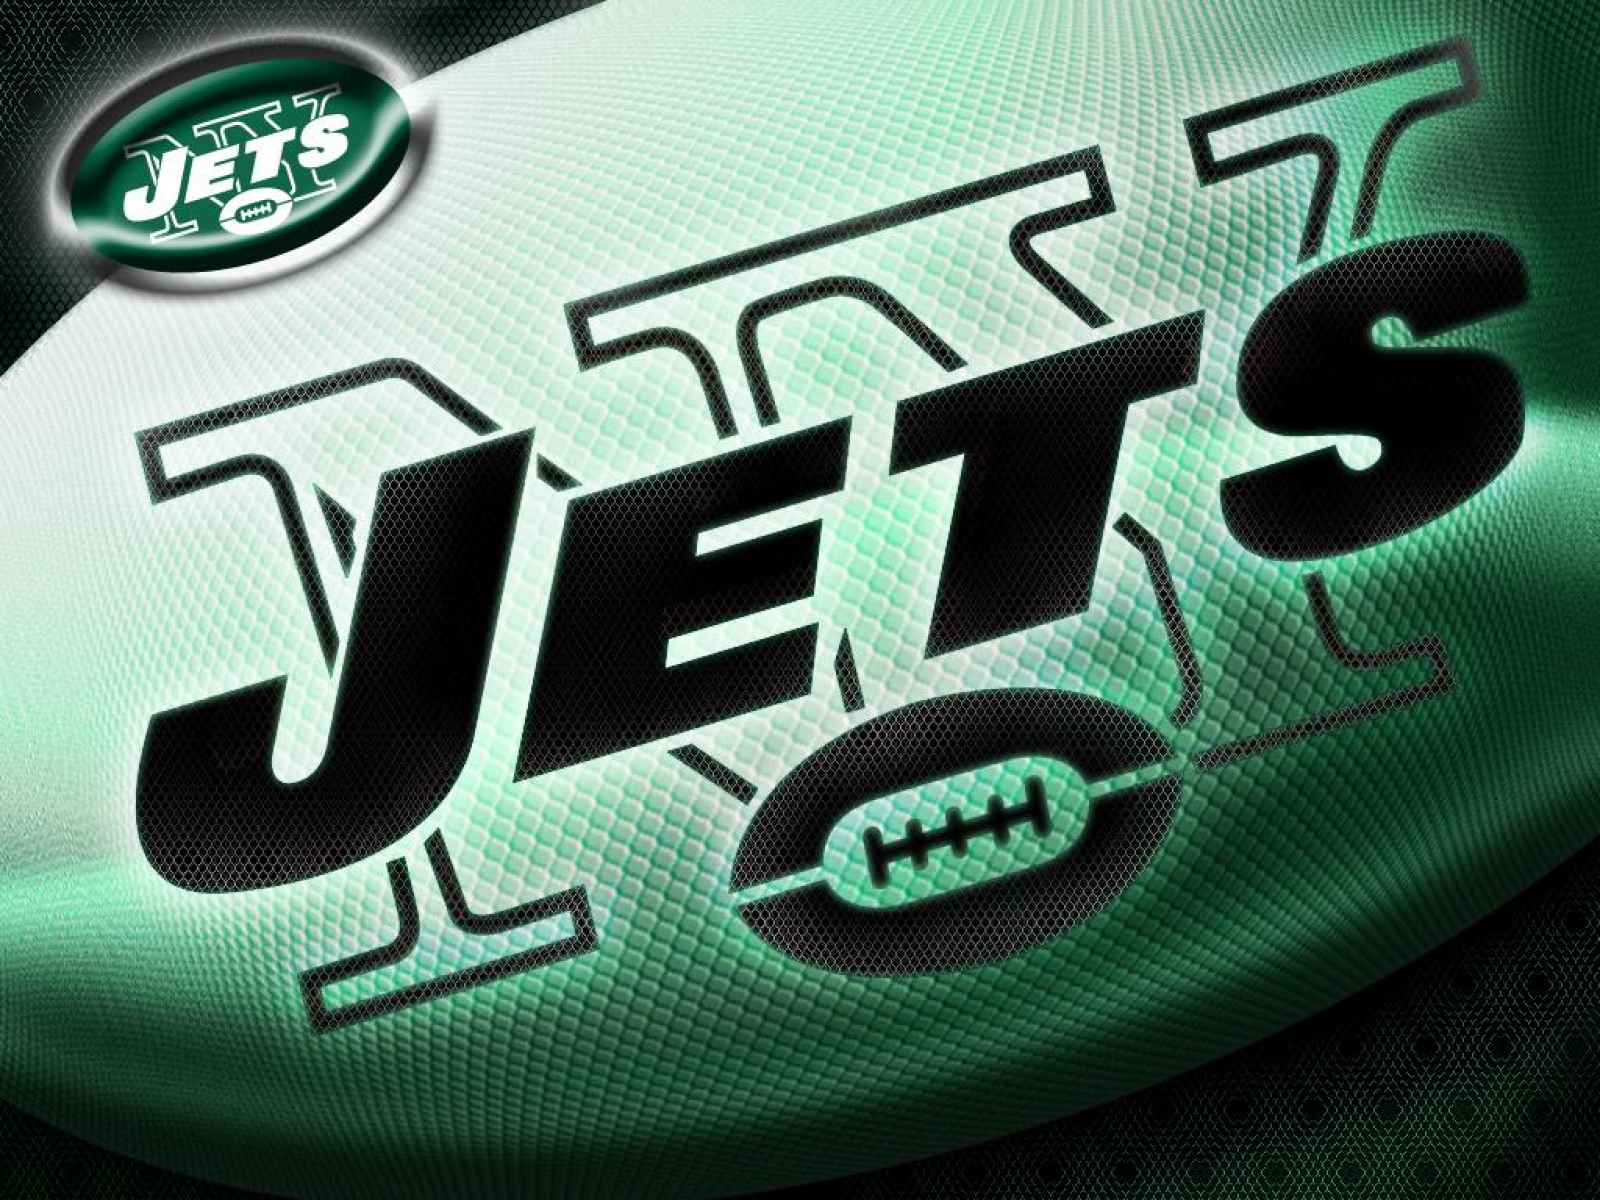 Free New York Jets wallpaper New York Jets wallpapers